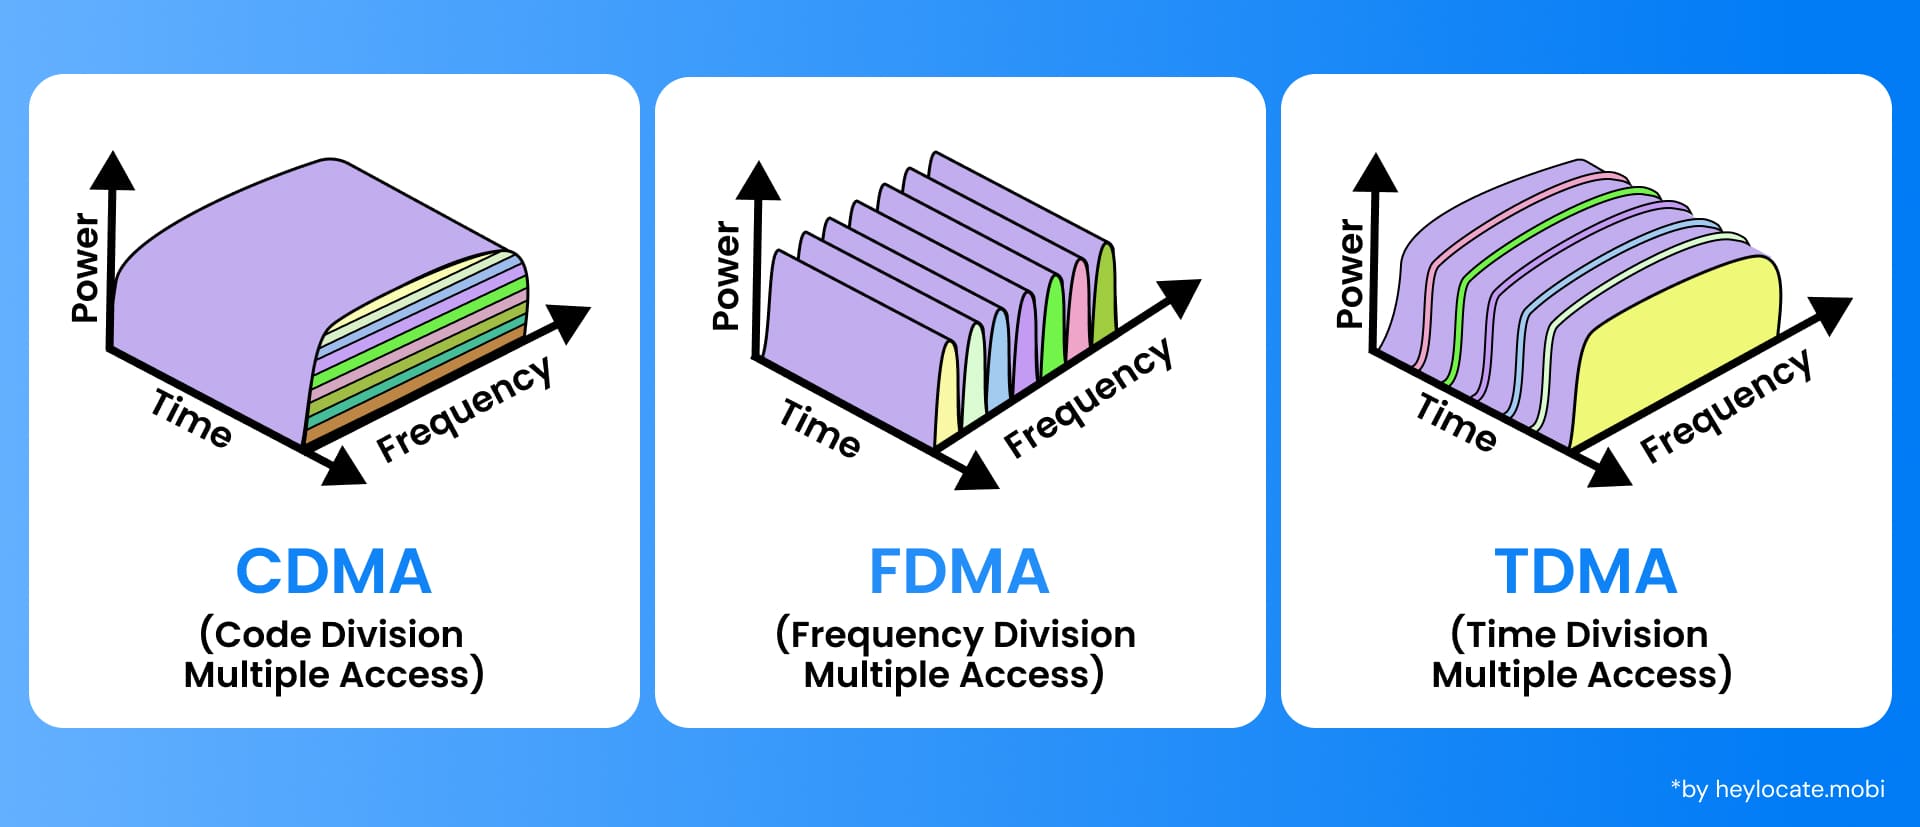 A depiction of three different multiple access technologies used in telecommunications: Code Division Multiple Access (CDMA), Time Division Multiple Access (TDMA), and Frequency Division Multiple Access (FDMA). Each method is represented by a three-dimensional graph showing how each technology divides the communications spectrum differently by power, time and frequency